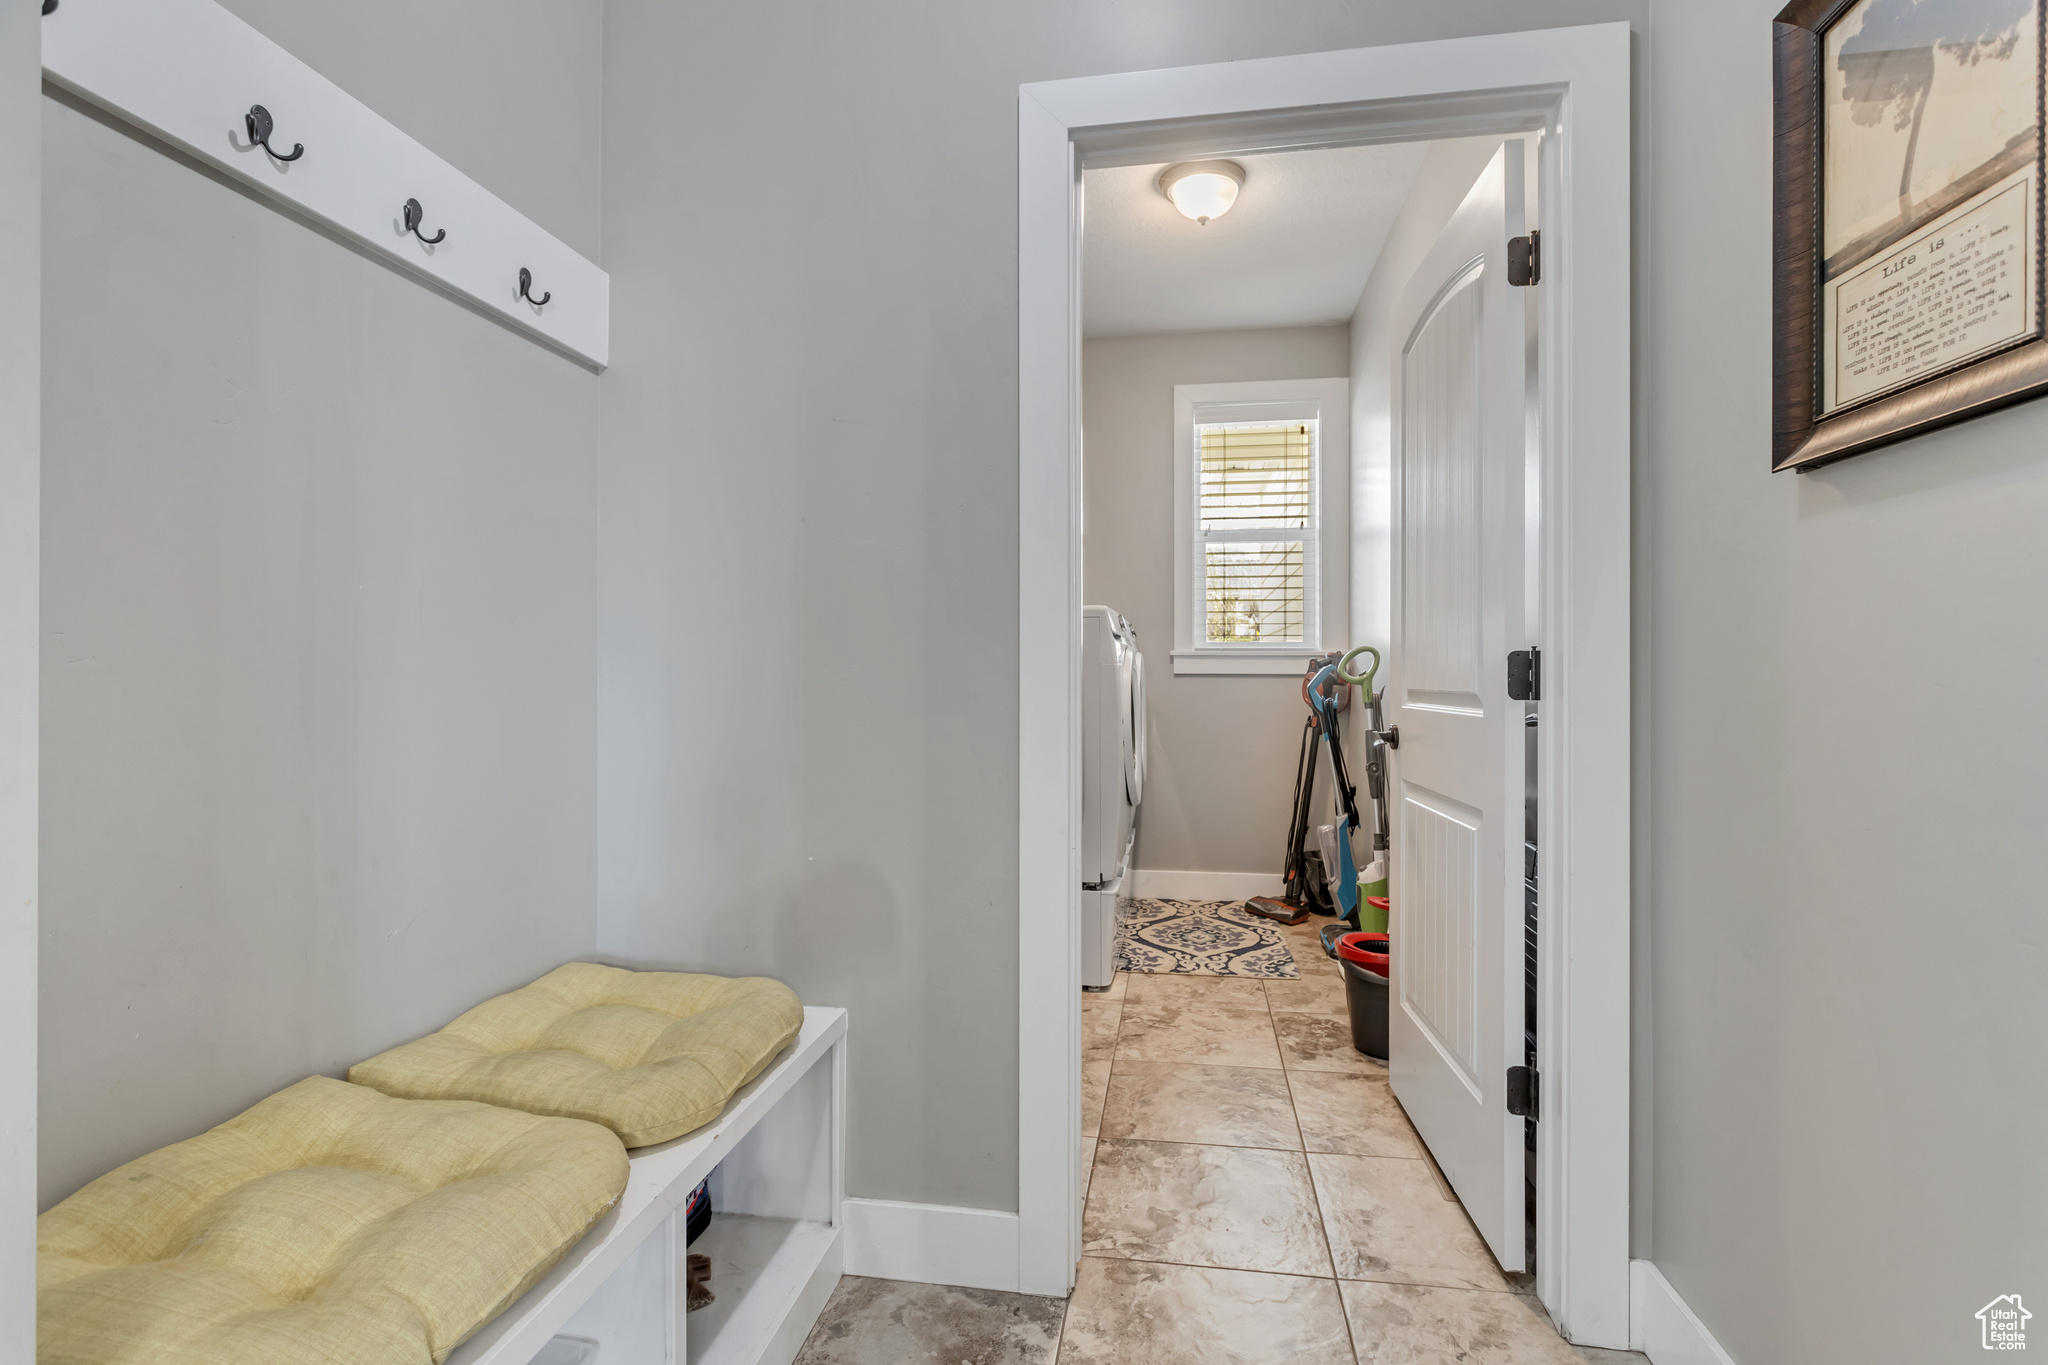 Mudroom featuring light tile floors and washer / dryer